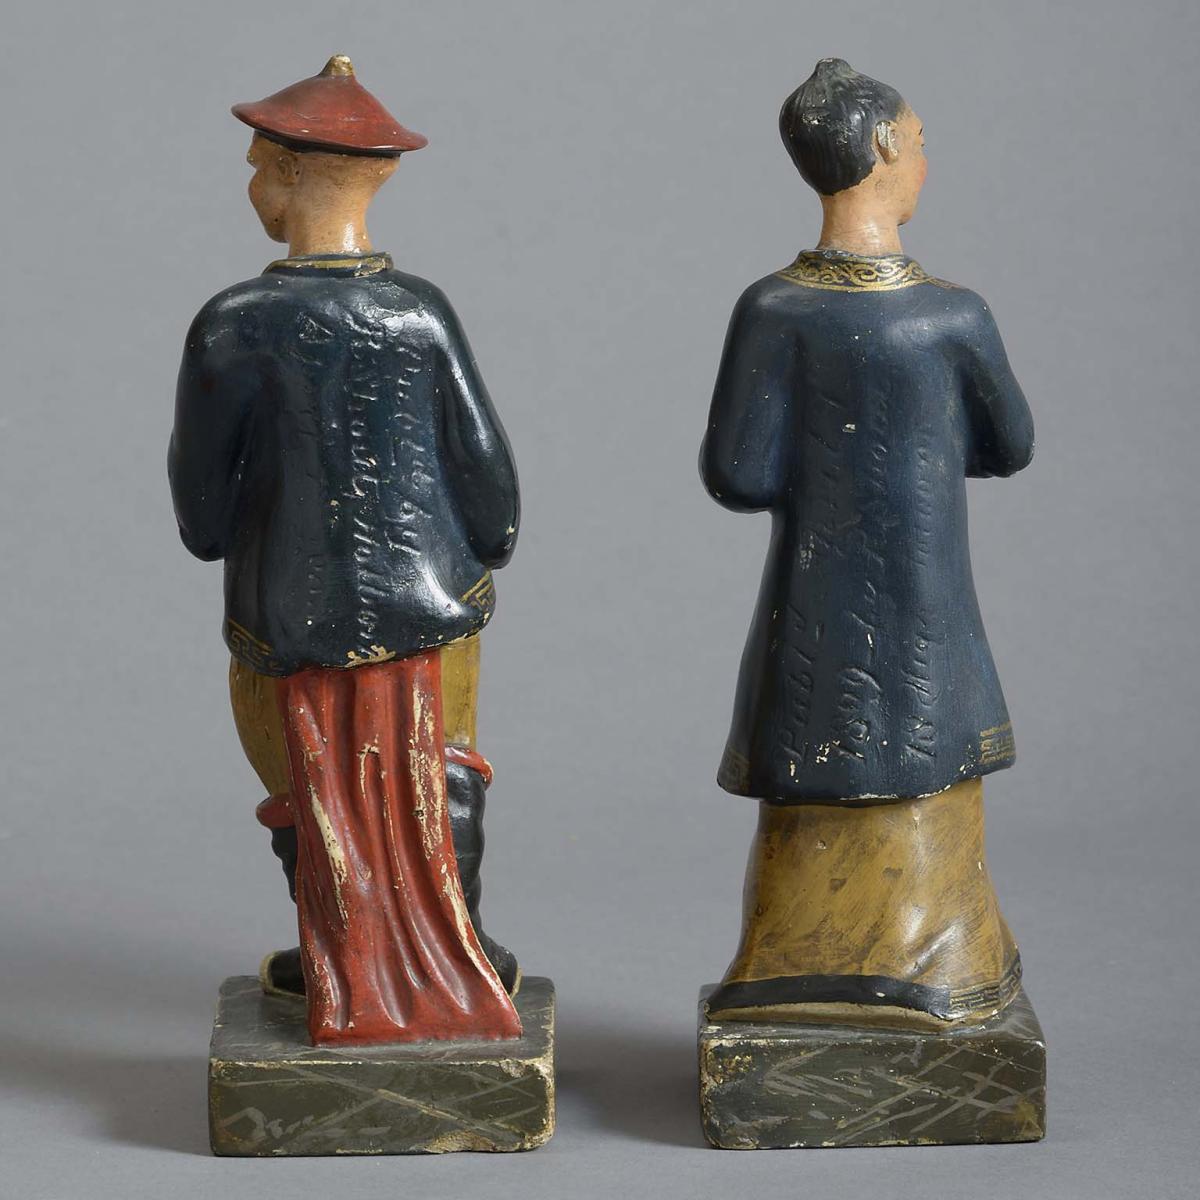 Polychrome Painted Plaster Figures by Robert Shout